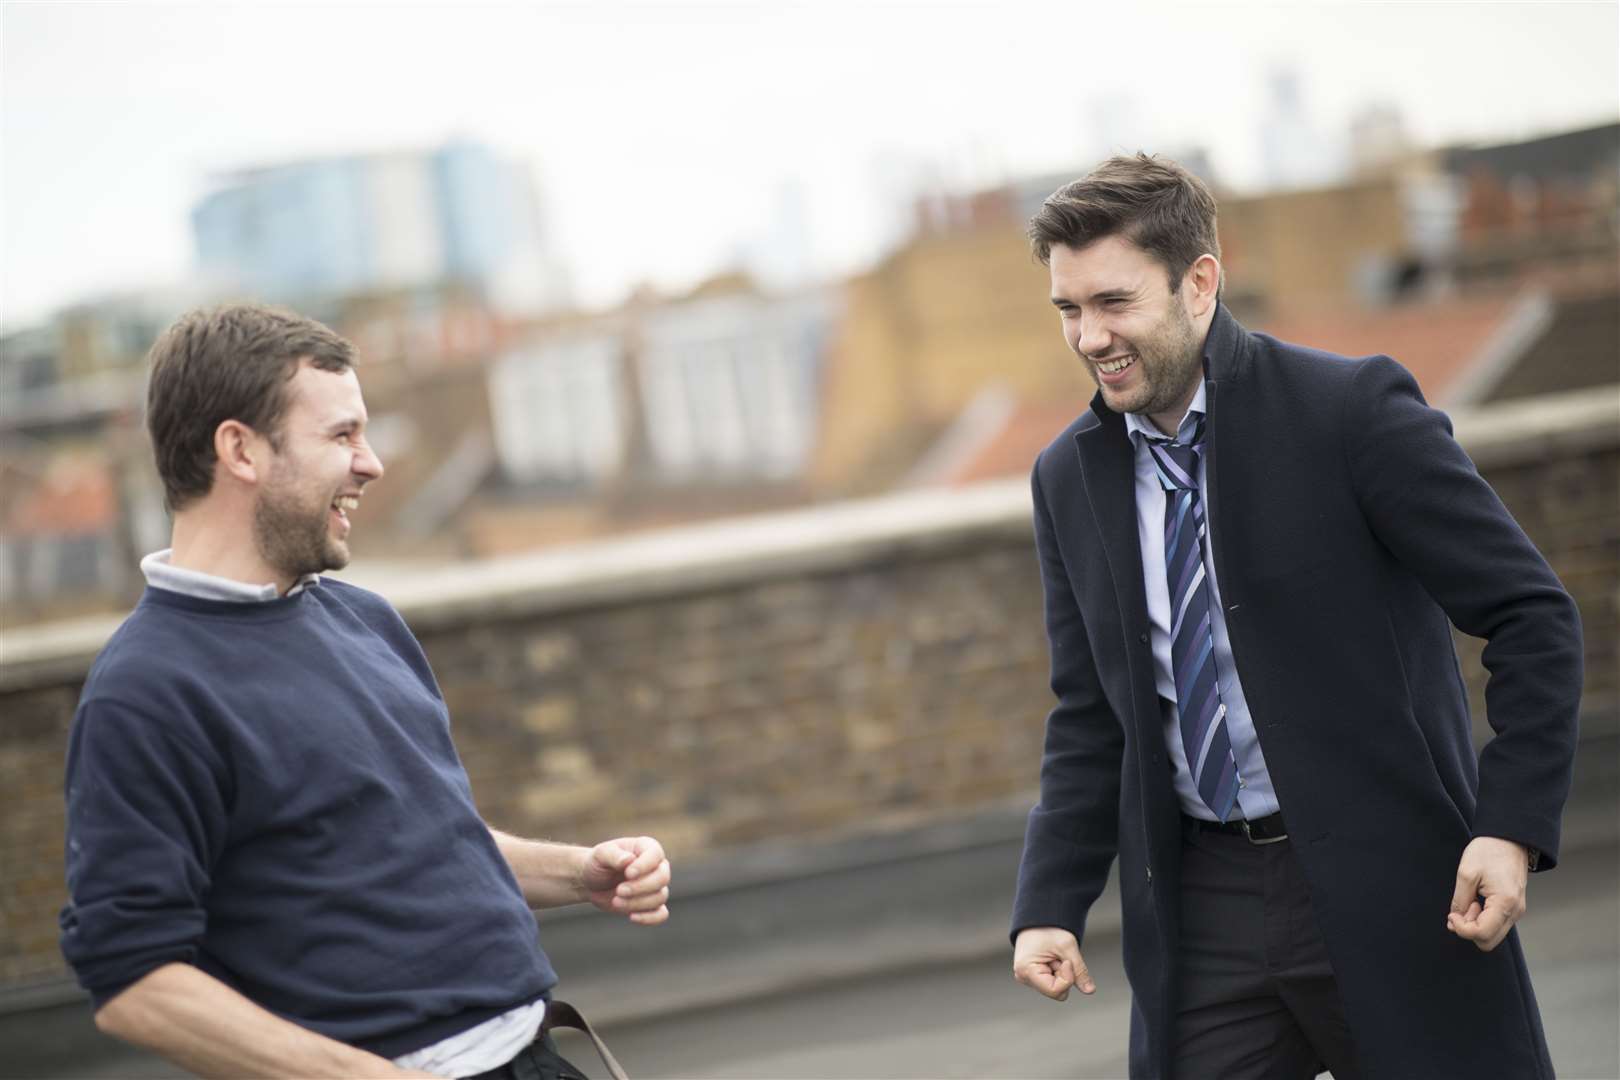 Lee (left) and Anthony share a laugh in between takes